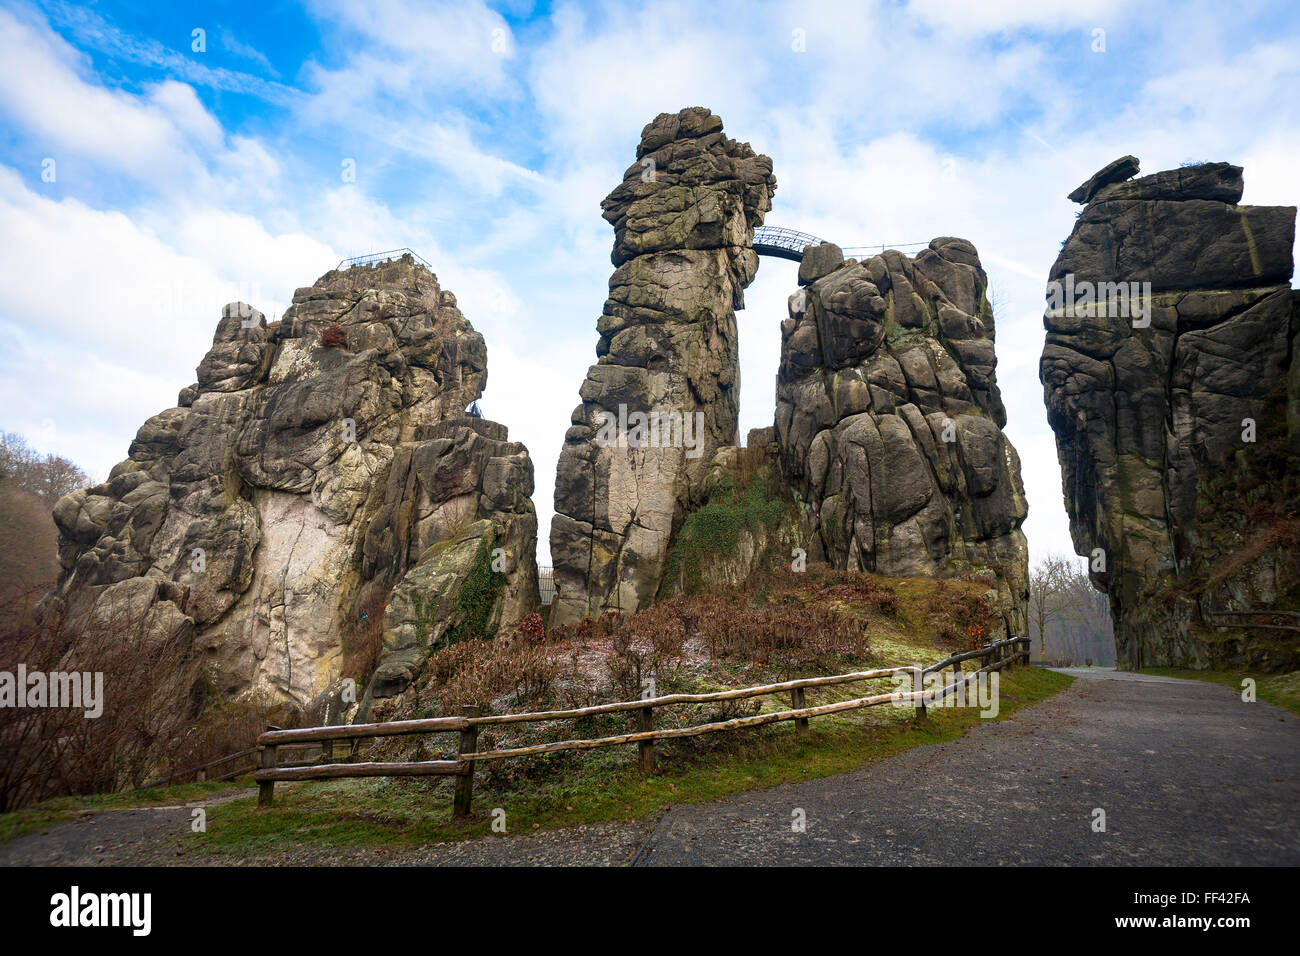 Europe, Germany, North Rhine-Westphalia, the Externsteine at the Teutoburg Forest near the city of Horn-Bad Meinberg.  Europa, D Stock Photo